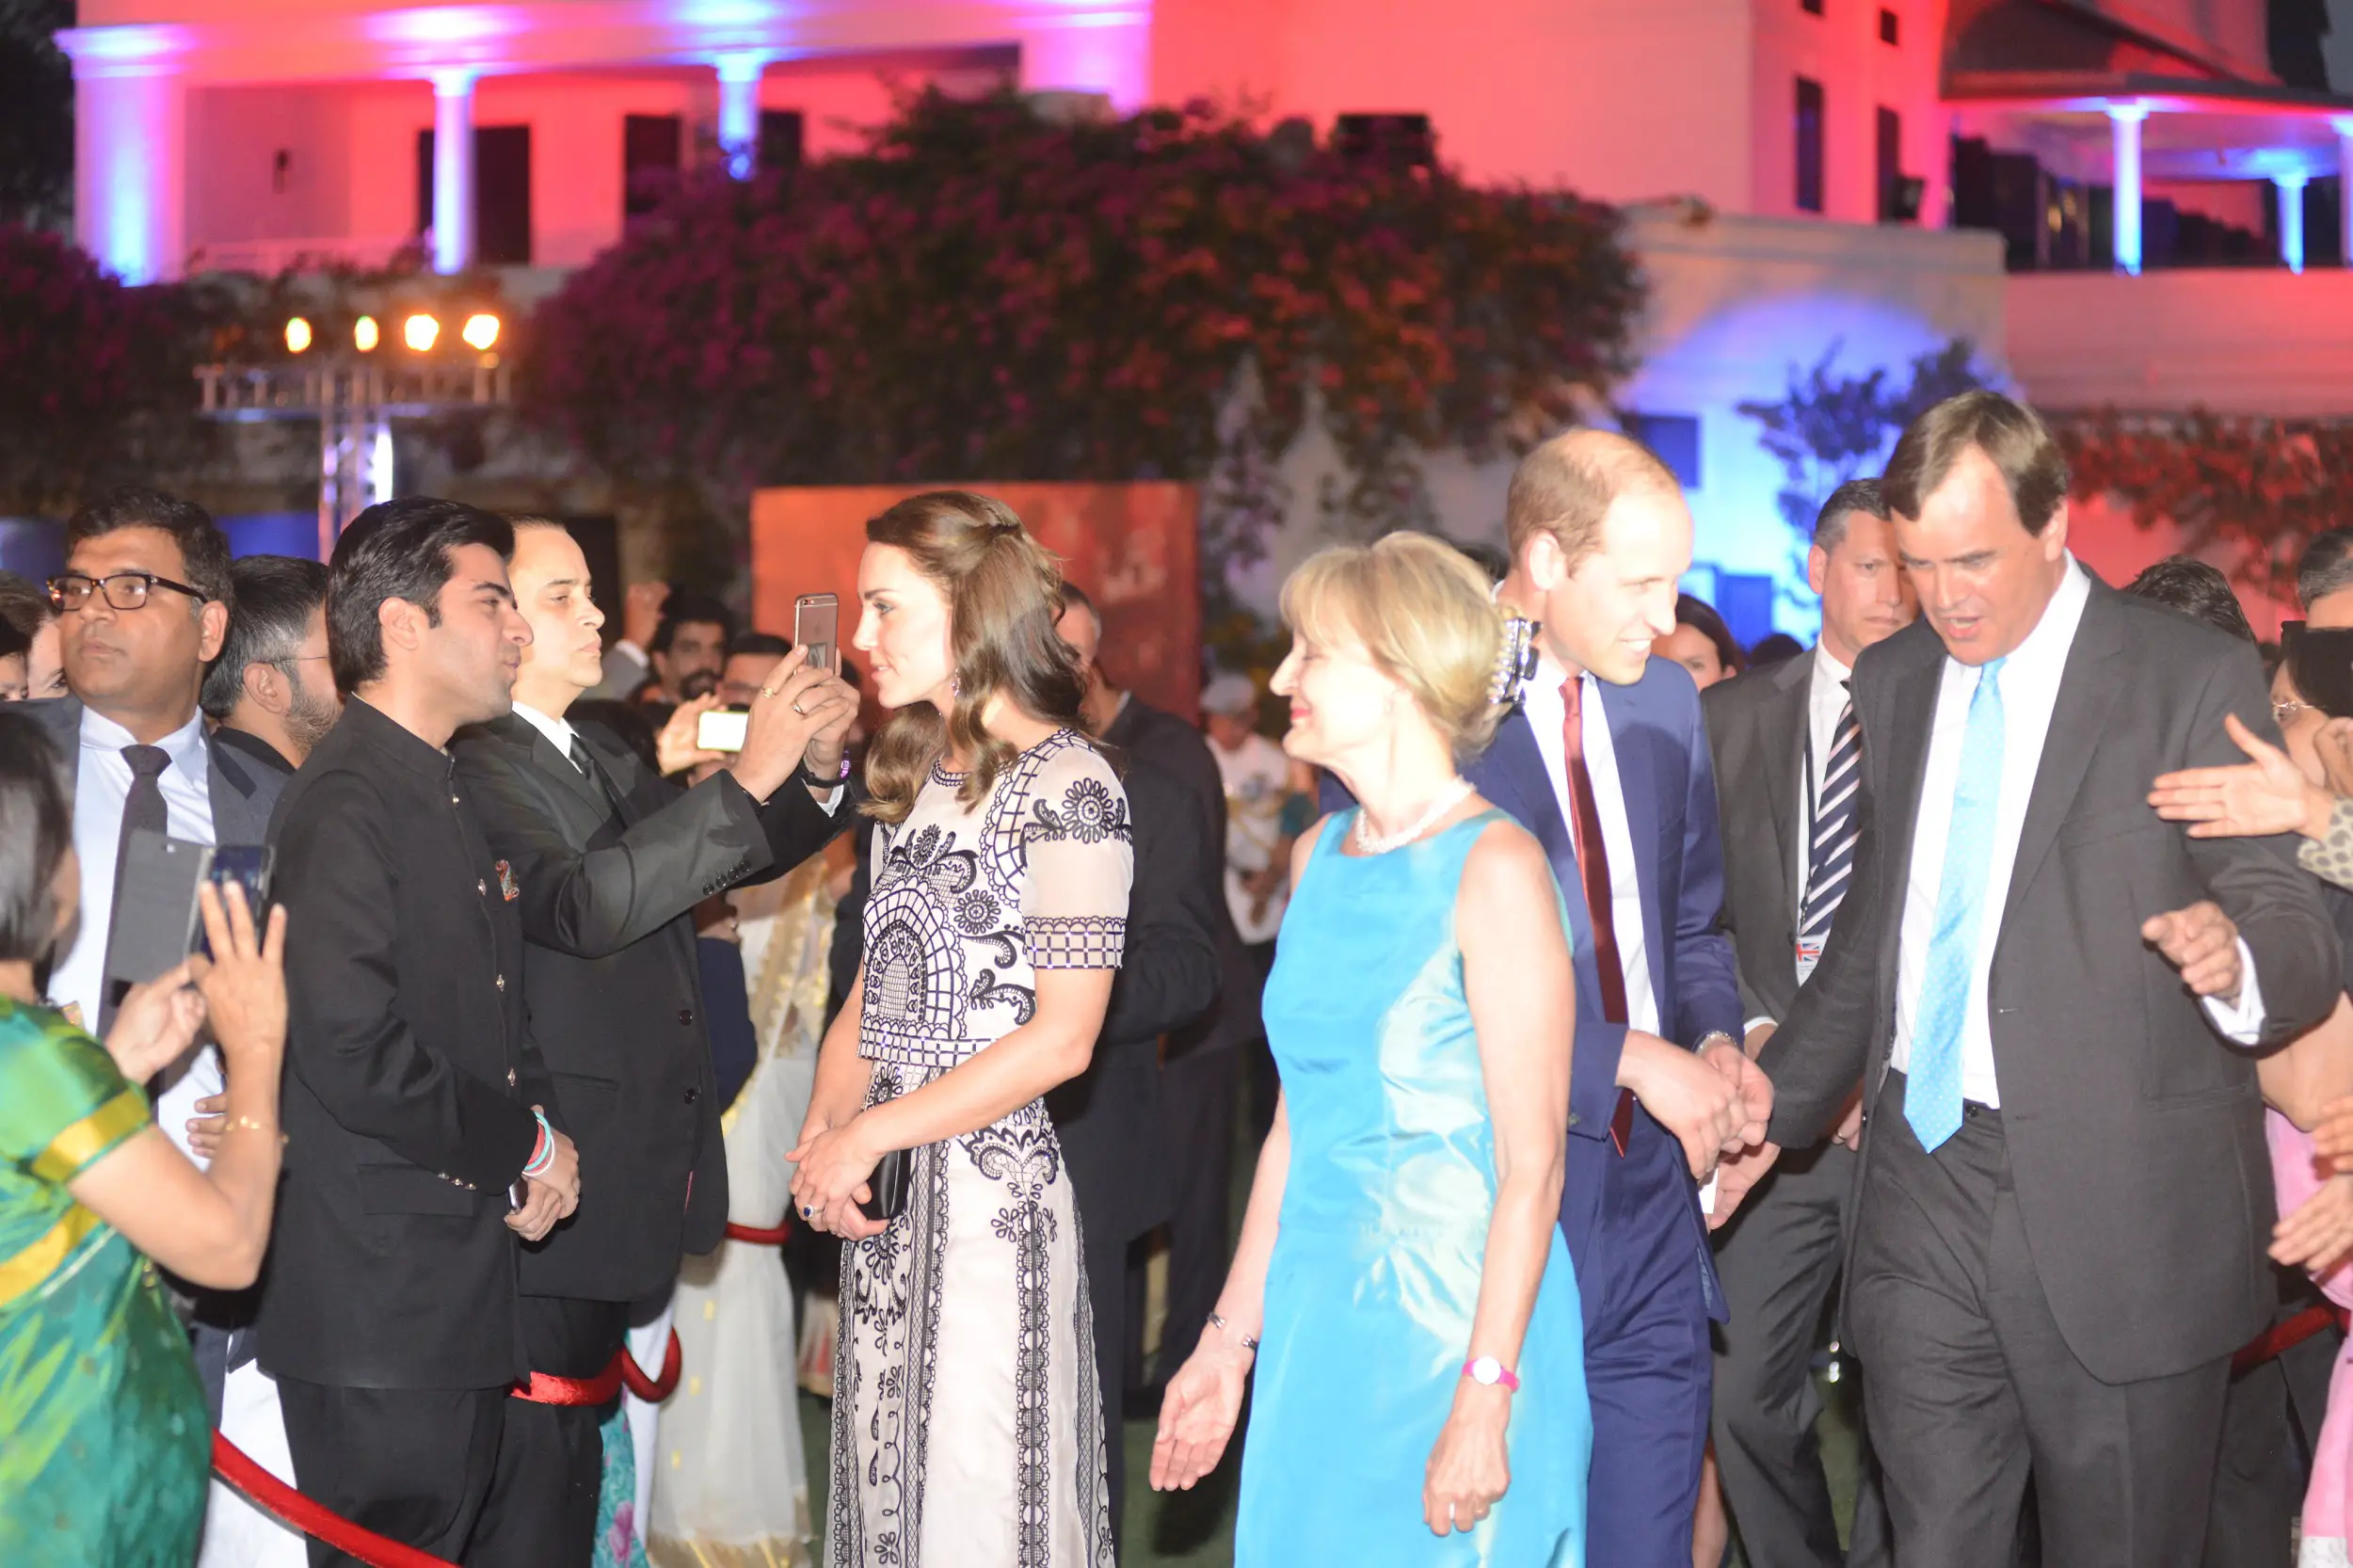 The Duke and Duchess of Cambridge attended Queen's 90th birthday party during the India tour